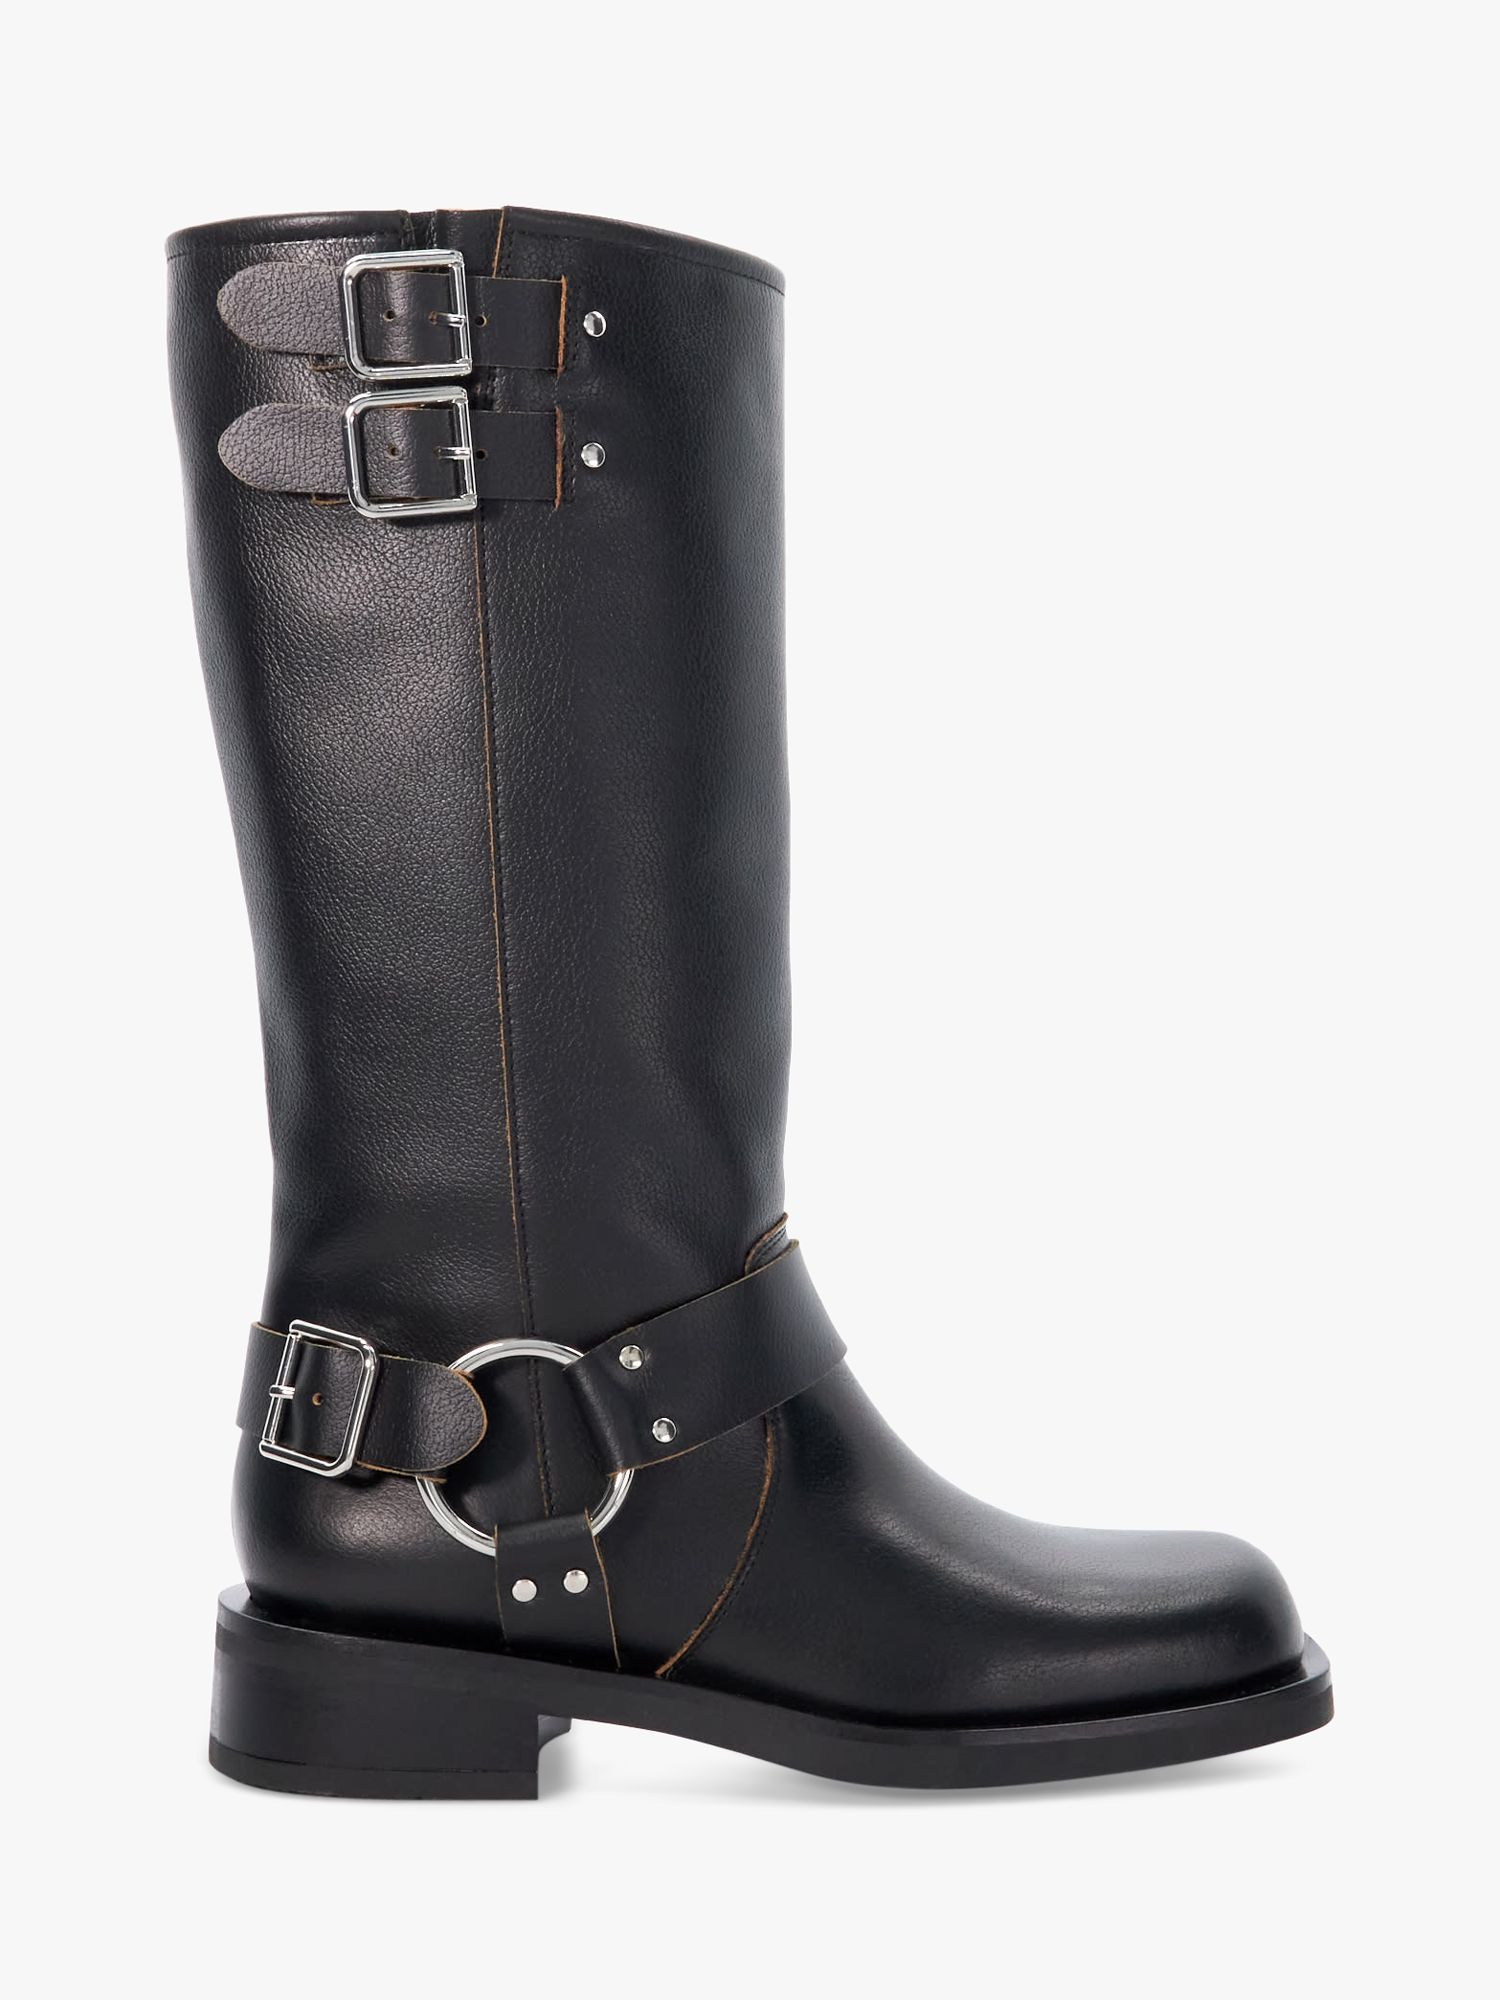 Dune Totoe Leather Buckle Detail Ankle Boots, Black at John Lewis ...